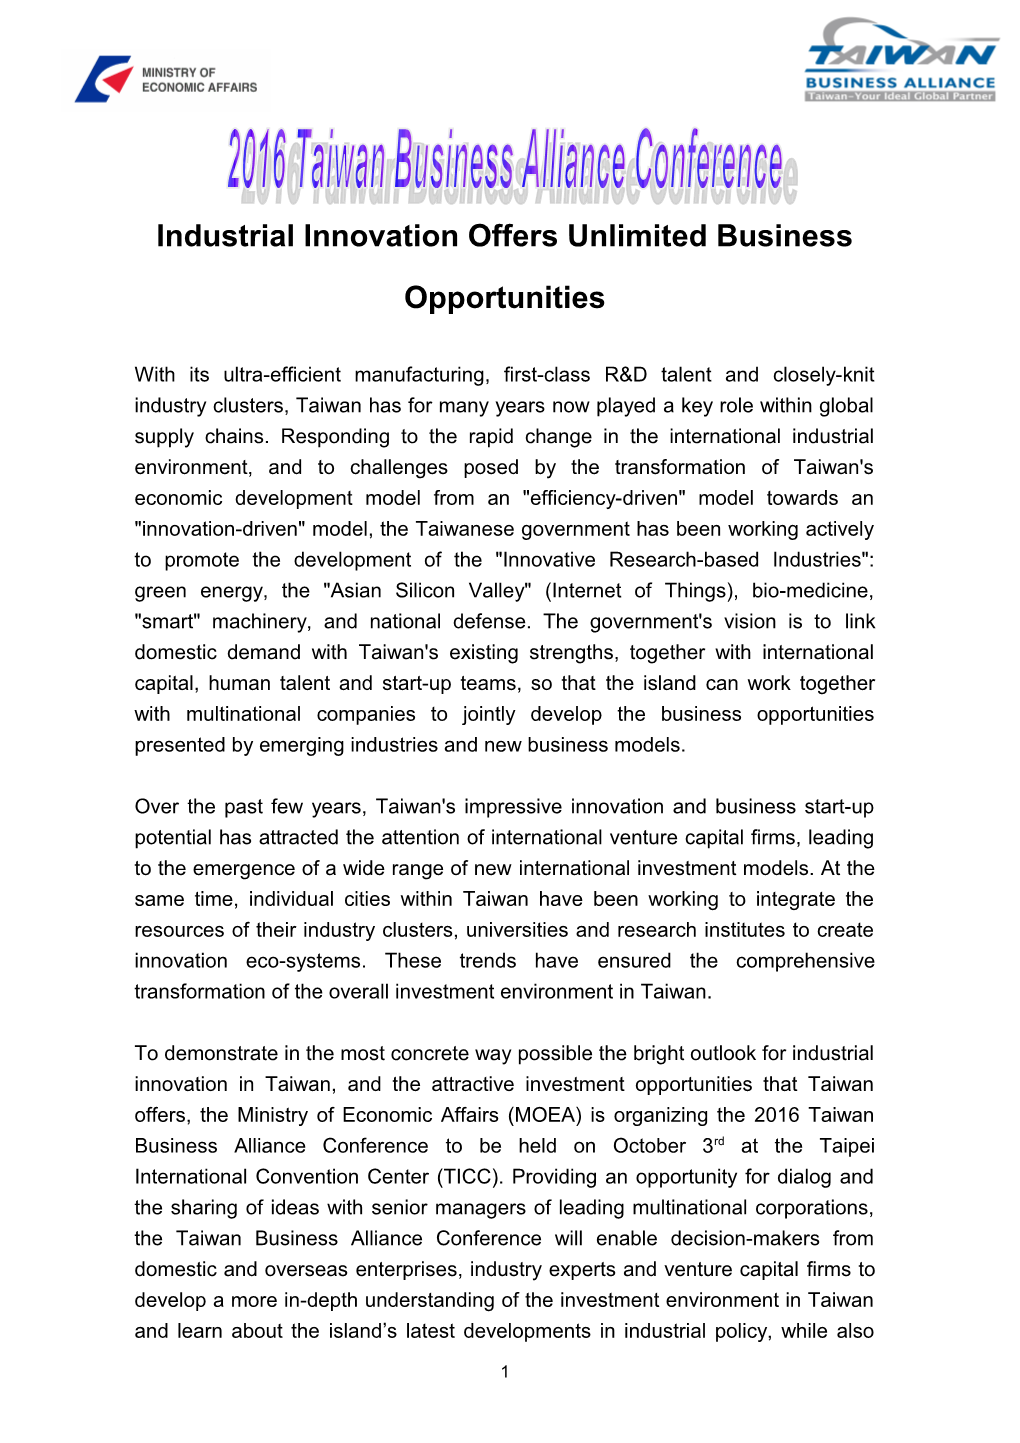 Industrial Innovation Offers Unlimited Business Opportunities